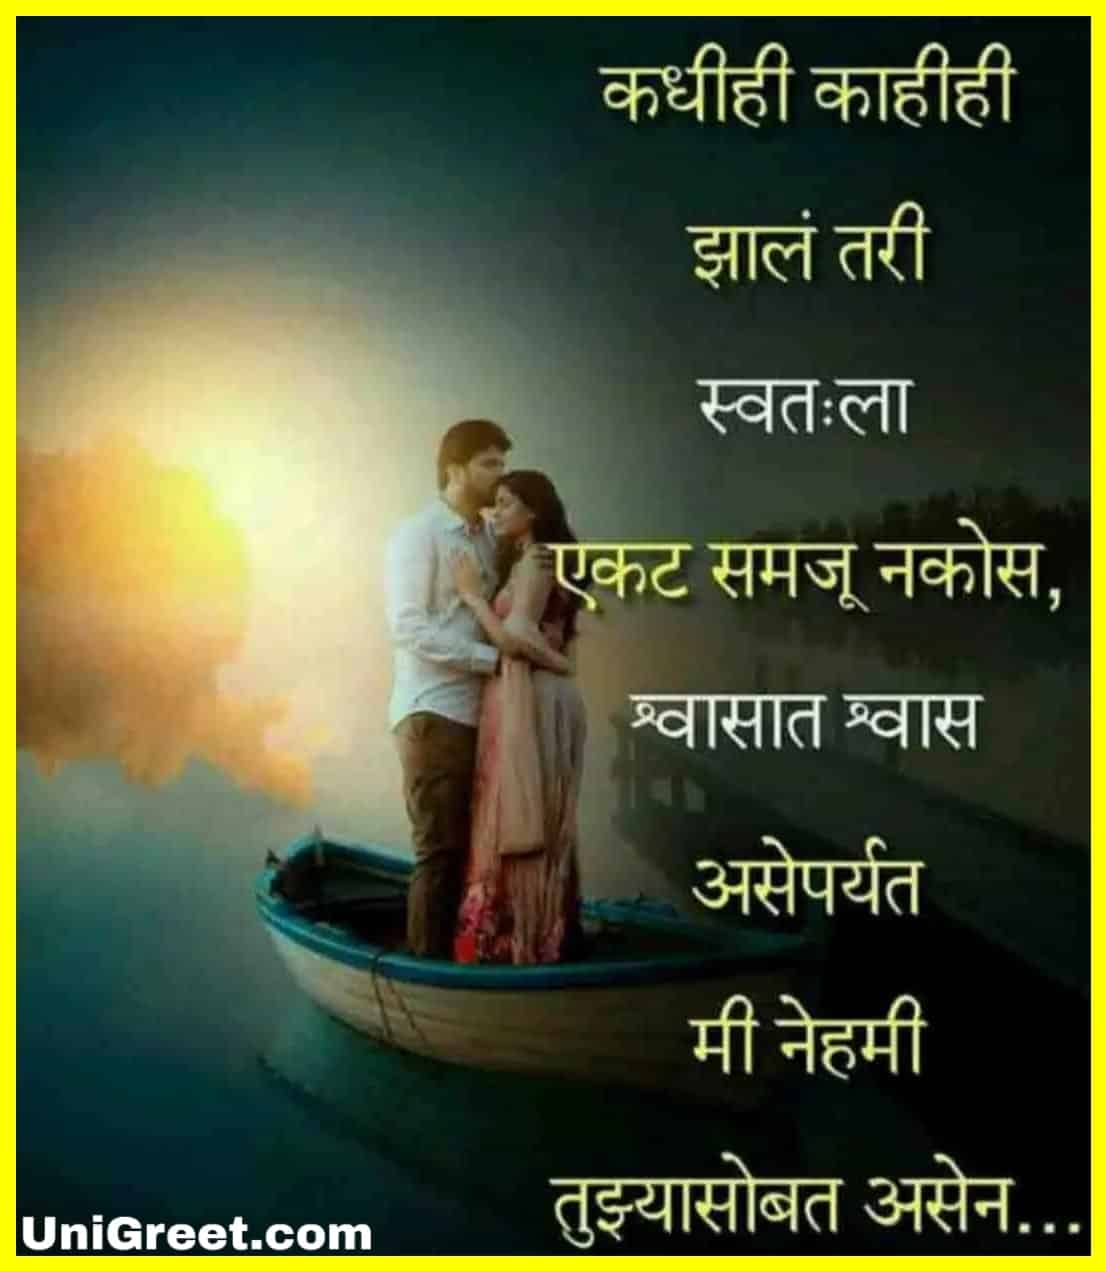 Romantic Images With Quotes In Marathi / Lovesove.com is to serve the